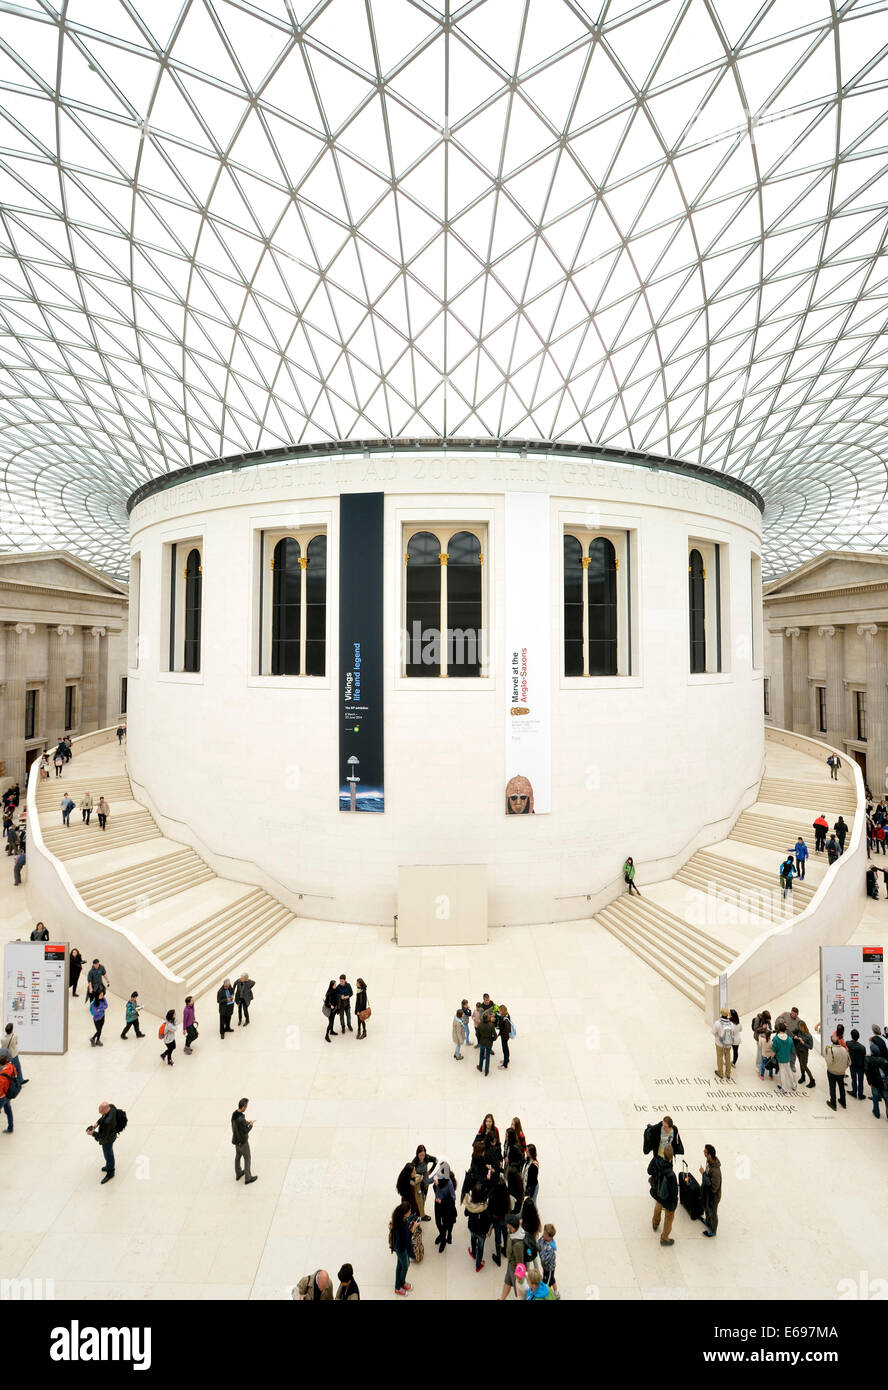 The Great Court, courtyard with a modern dome roof, steel and glass construction, British Museum, London, England Stock Photo